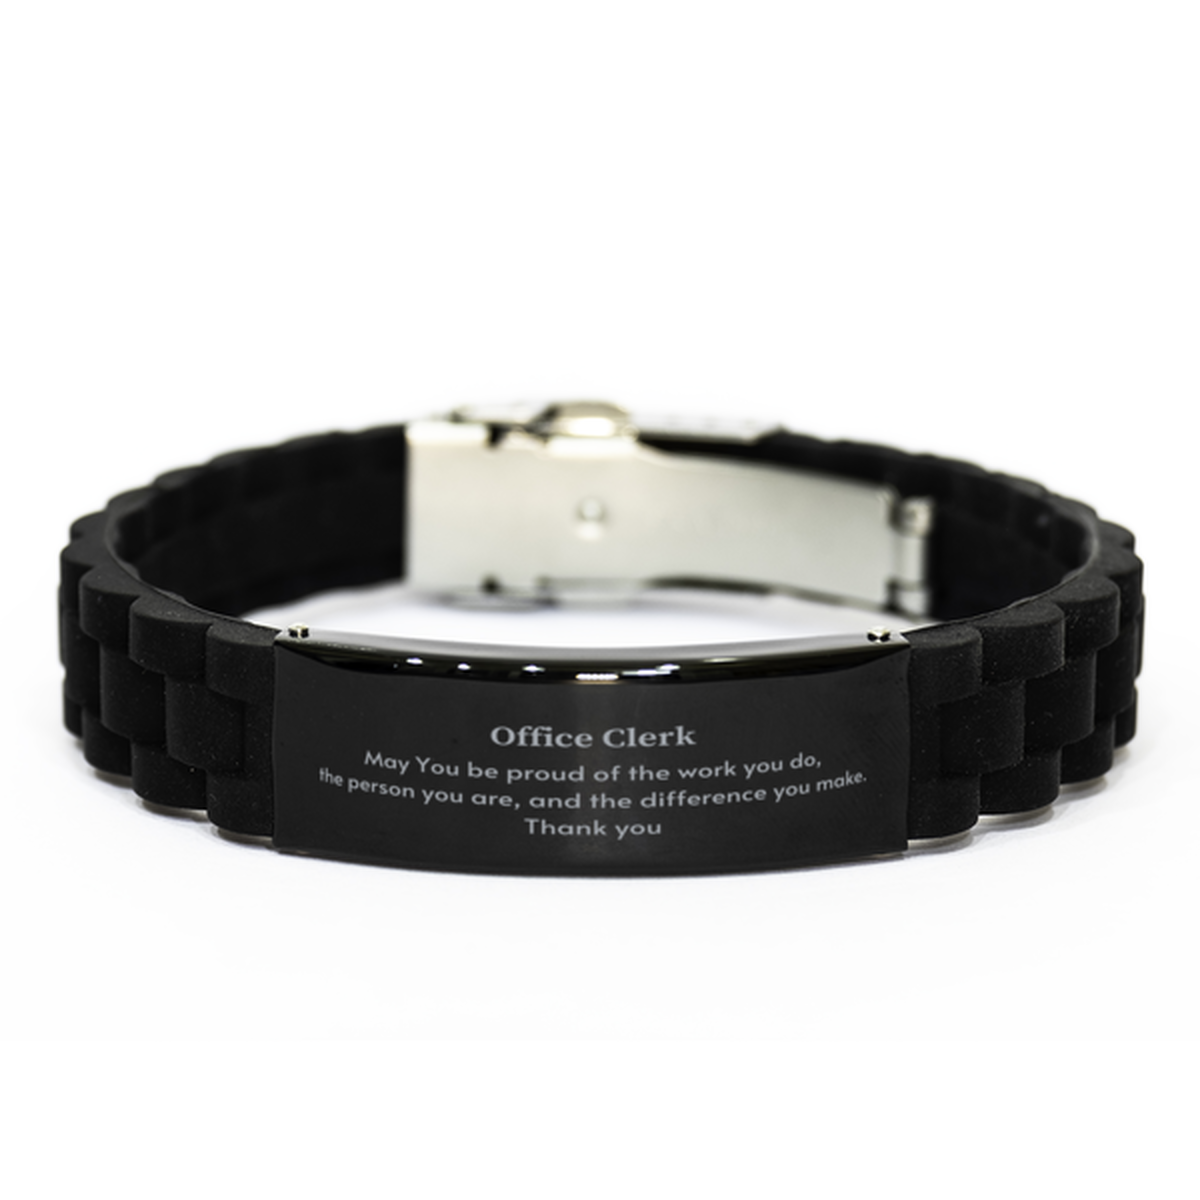 Heartwarming Black Glidelock Clasp Bracelet Retirement Coworkers Gifts for Office Clerk, Office Clerk May You be proud of the work you do, the person you are Gifts for Boss Men Women Friends